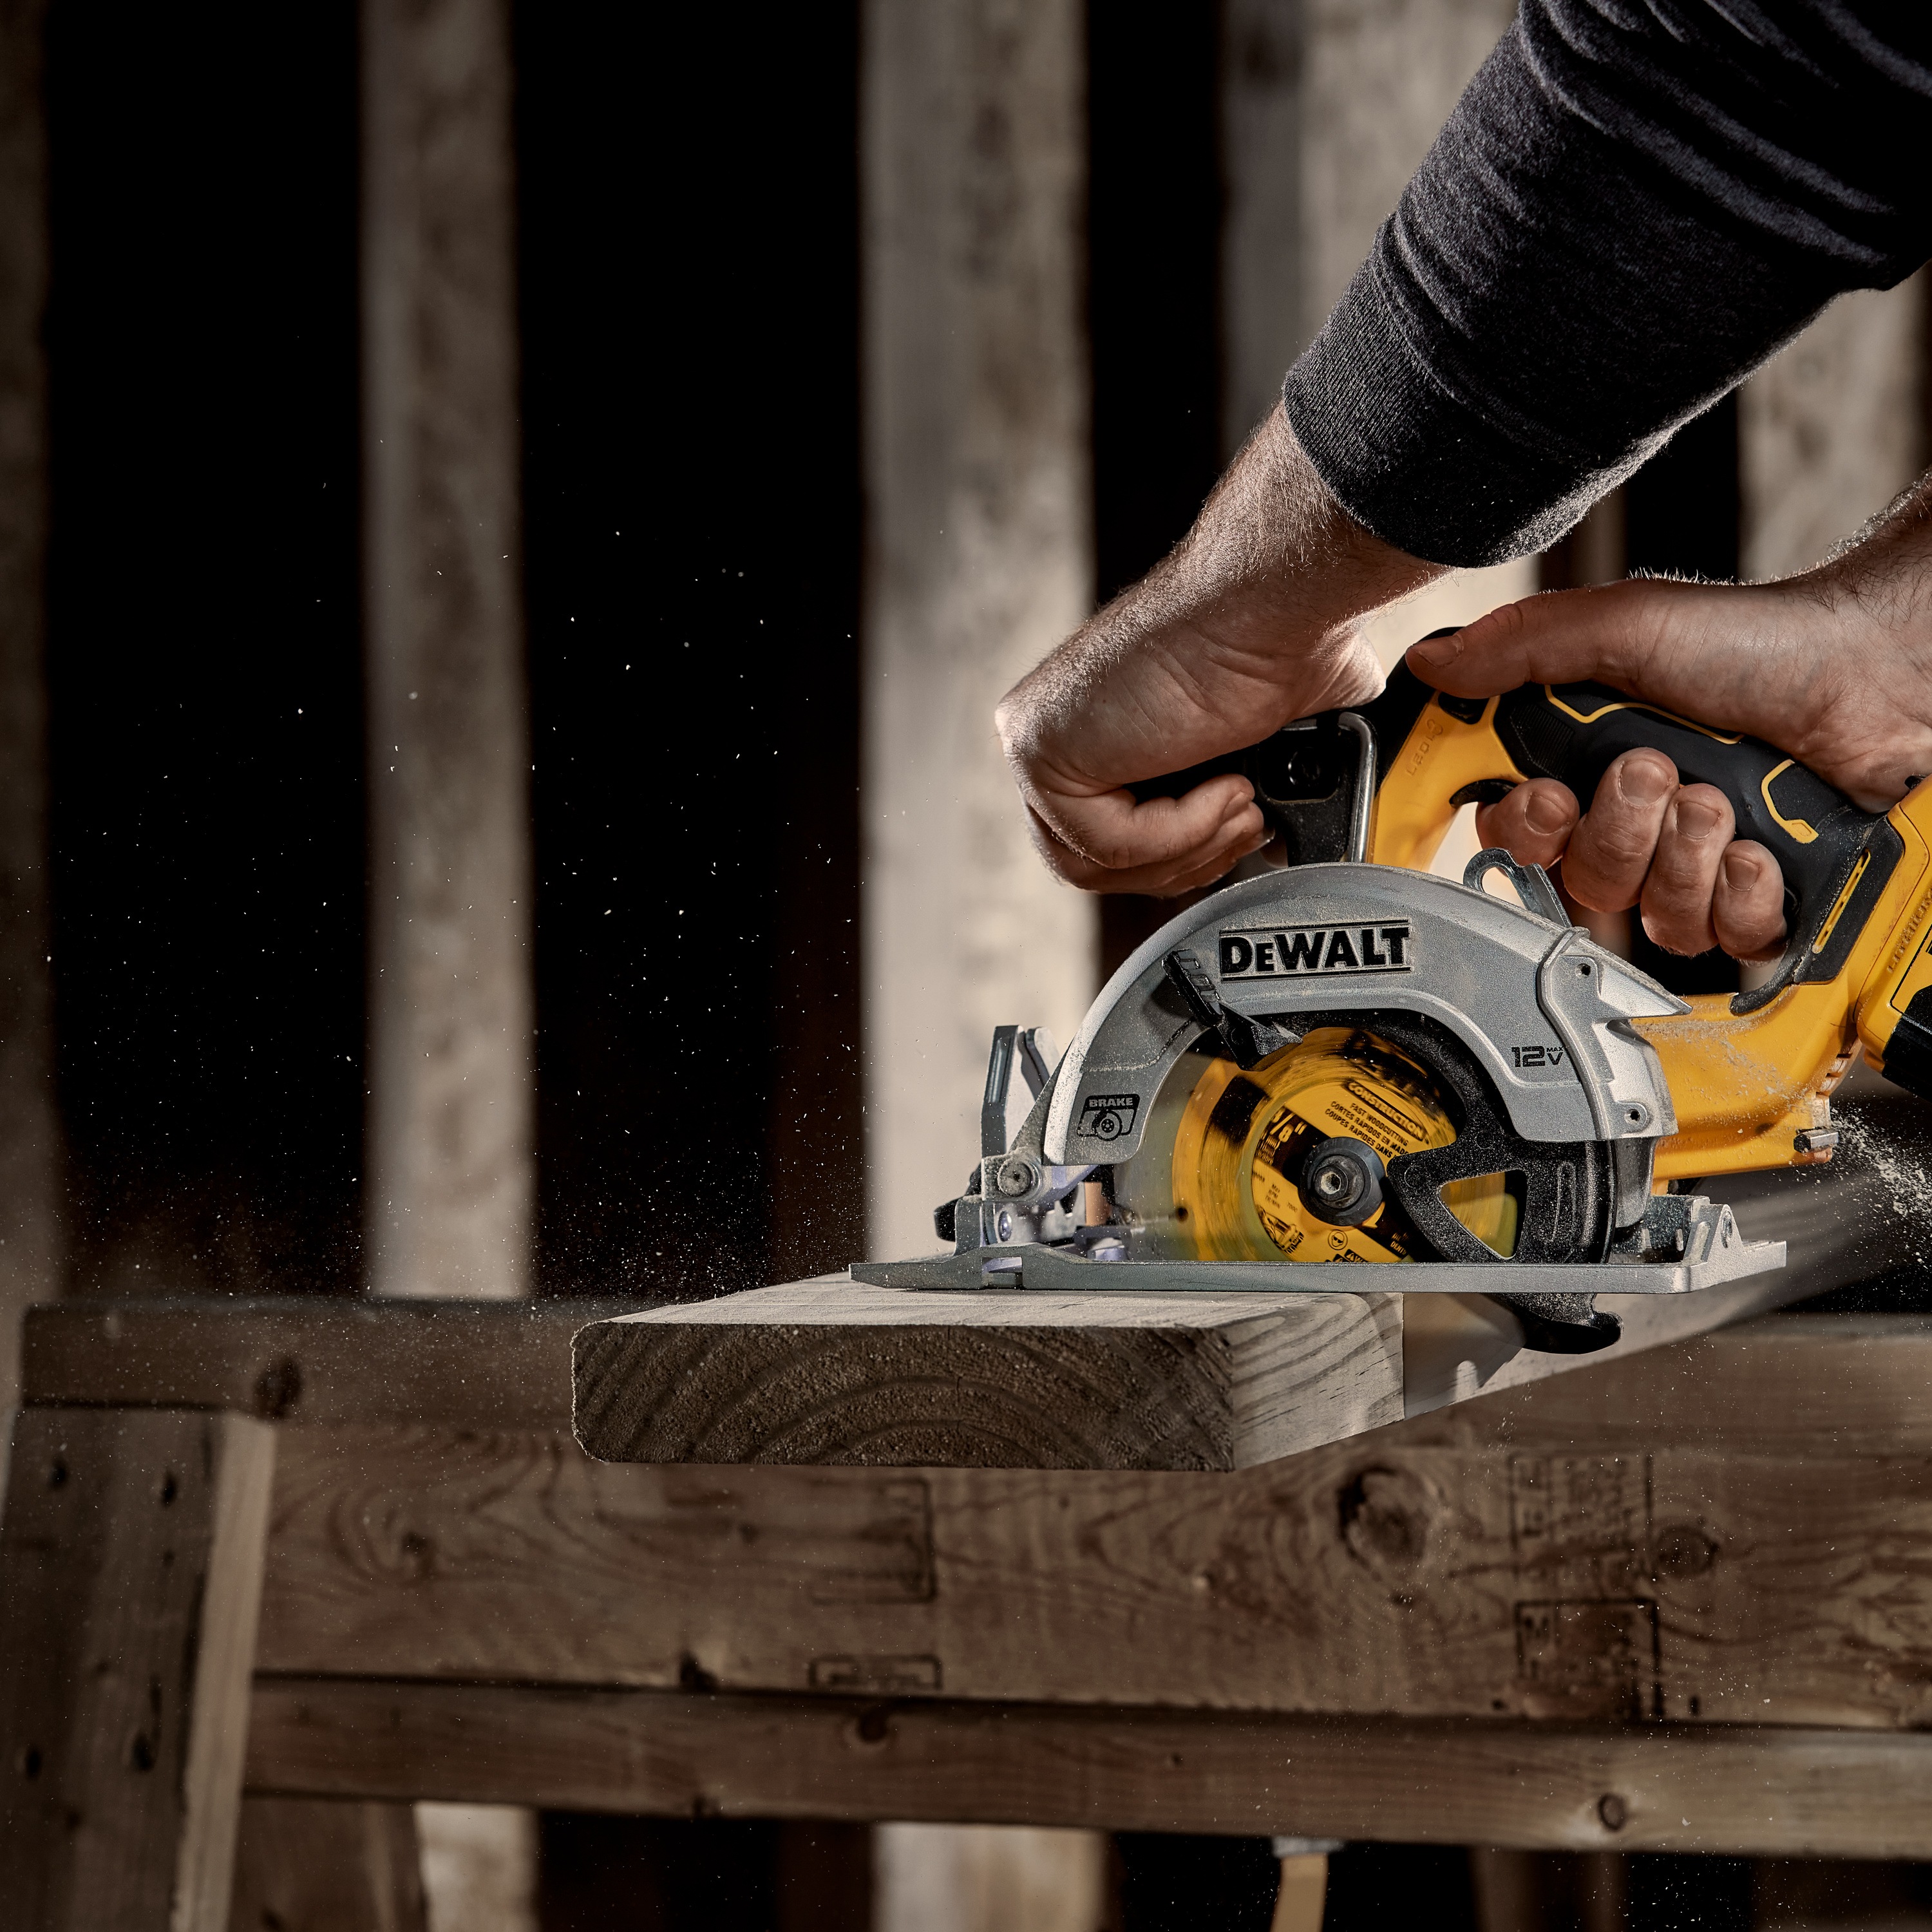 Xtreme 12 volt 5 and three eighths inch brushless cordless circular saw tool being used to cut wood.